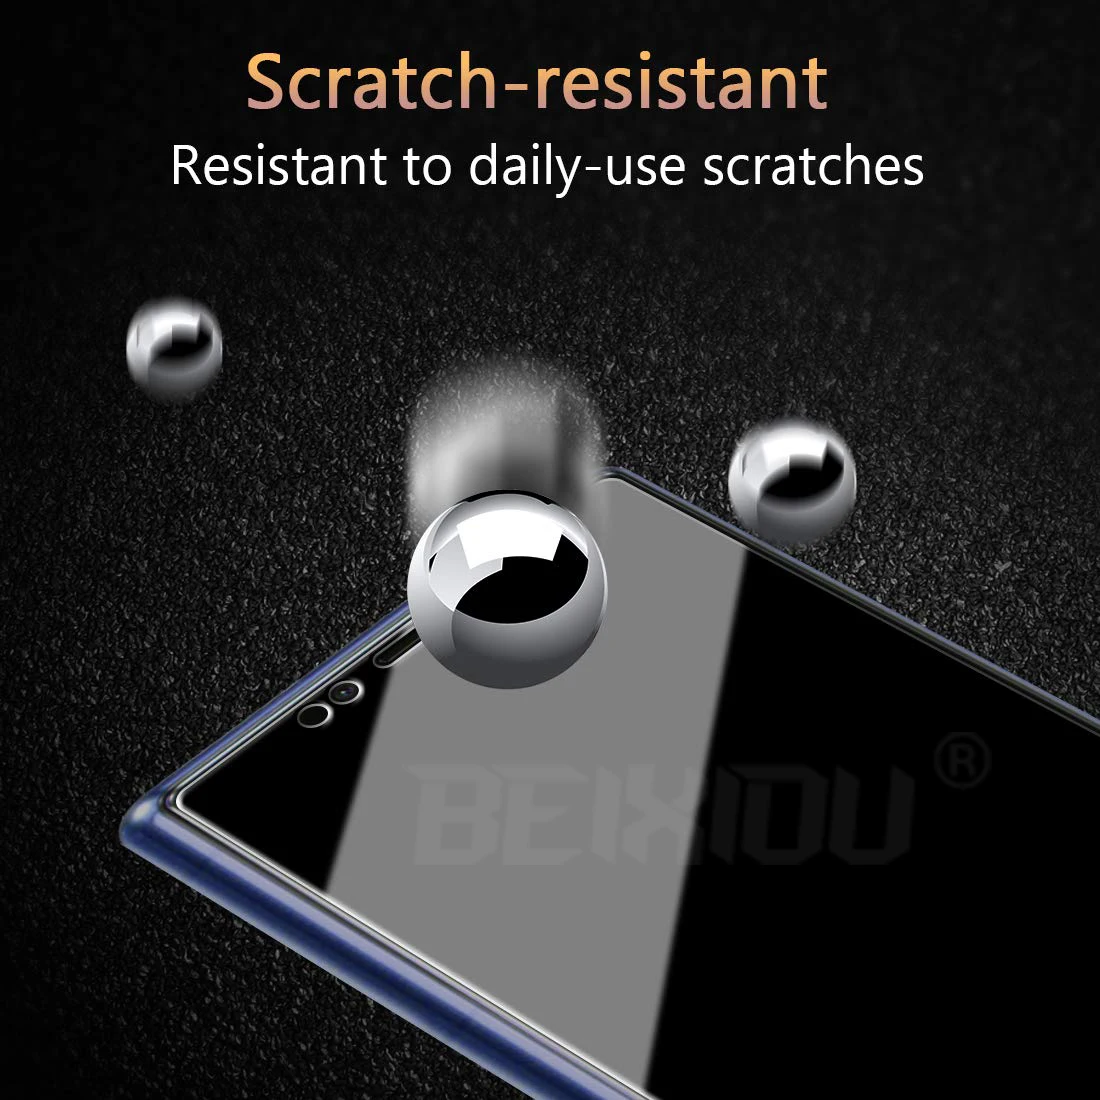 Full Tempered Glass For Sony Xperia 5 Screen Protector 2.5D 9h tempered glass SONY XPERIA Film |